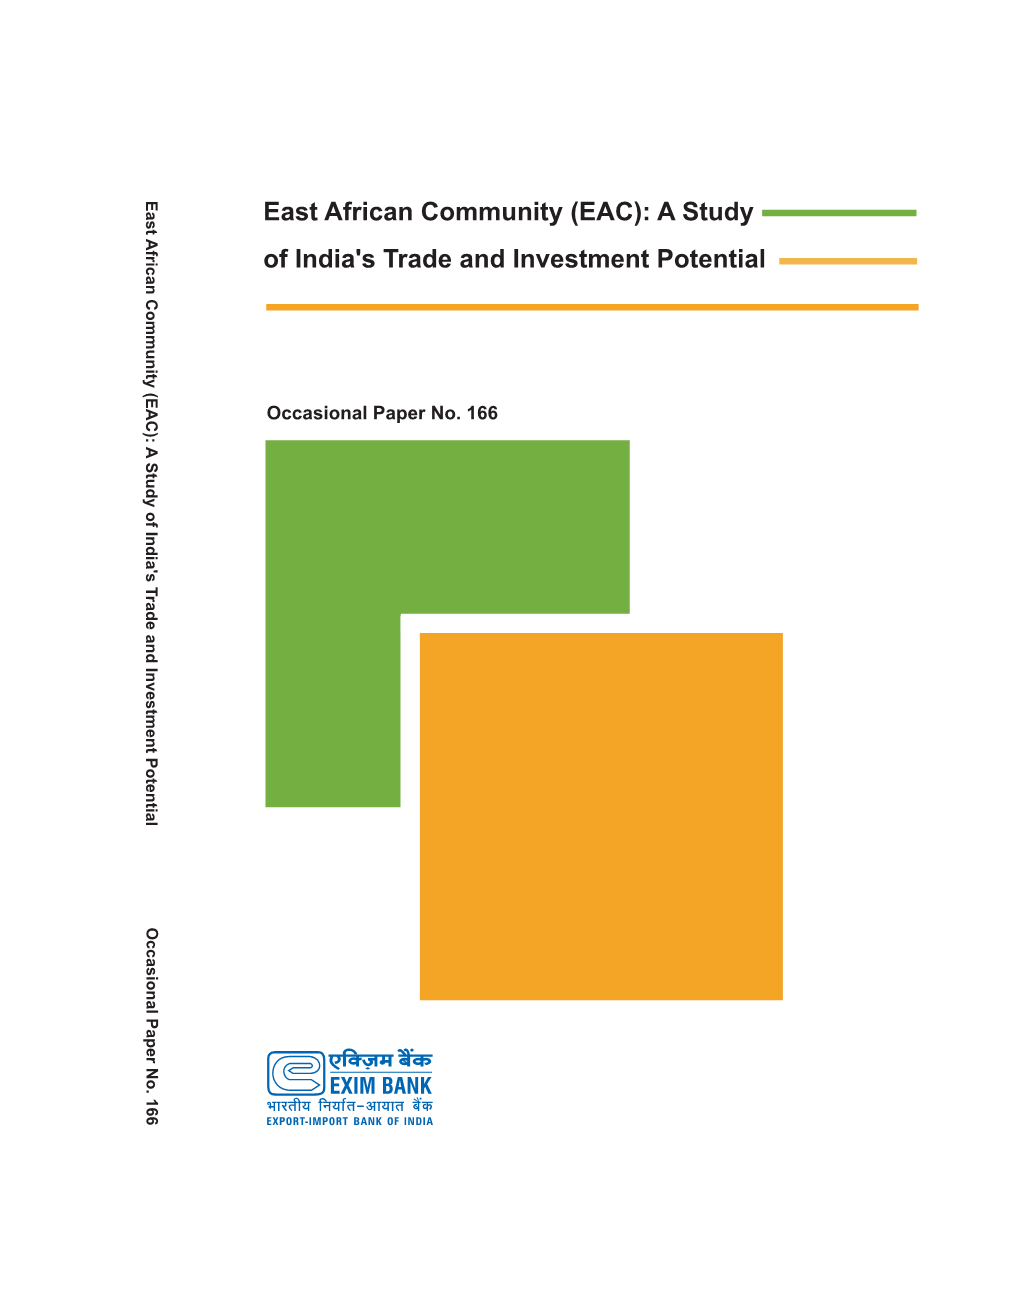 East African Community (Eac): a Study of India's Trade and Investment Potential